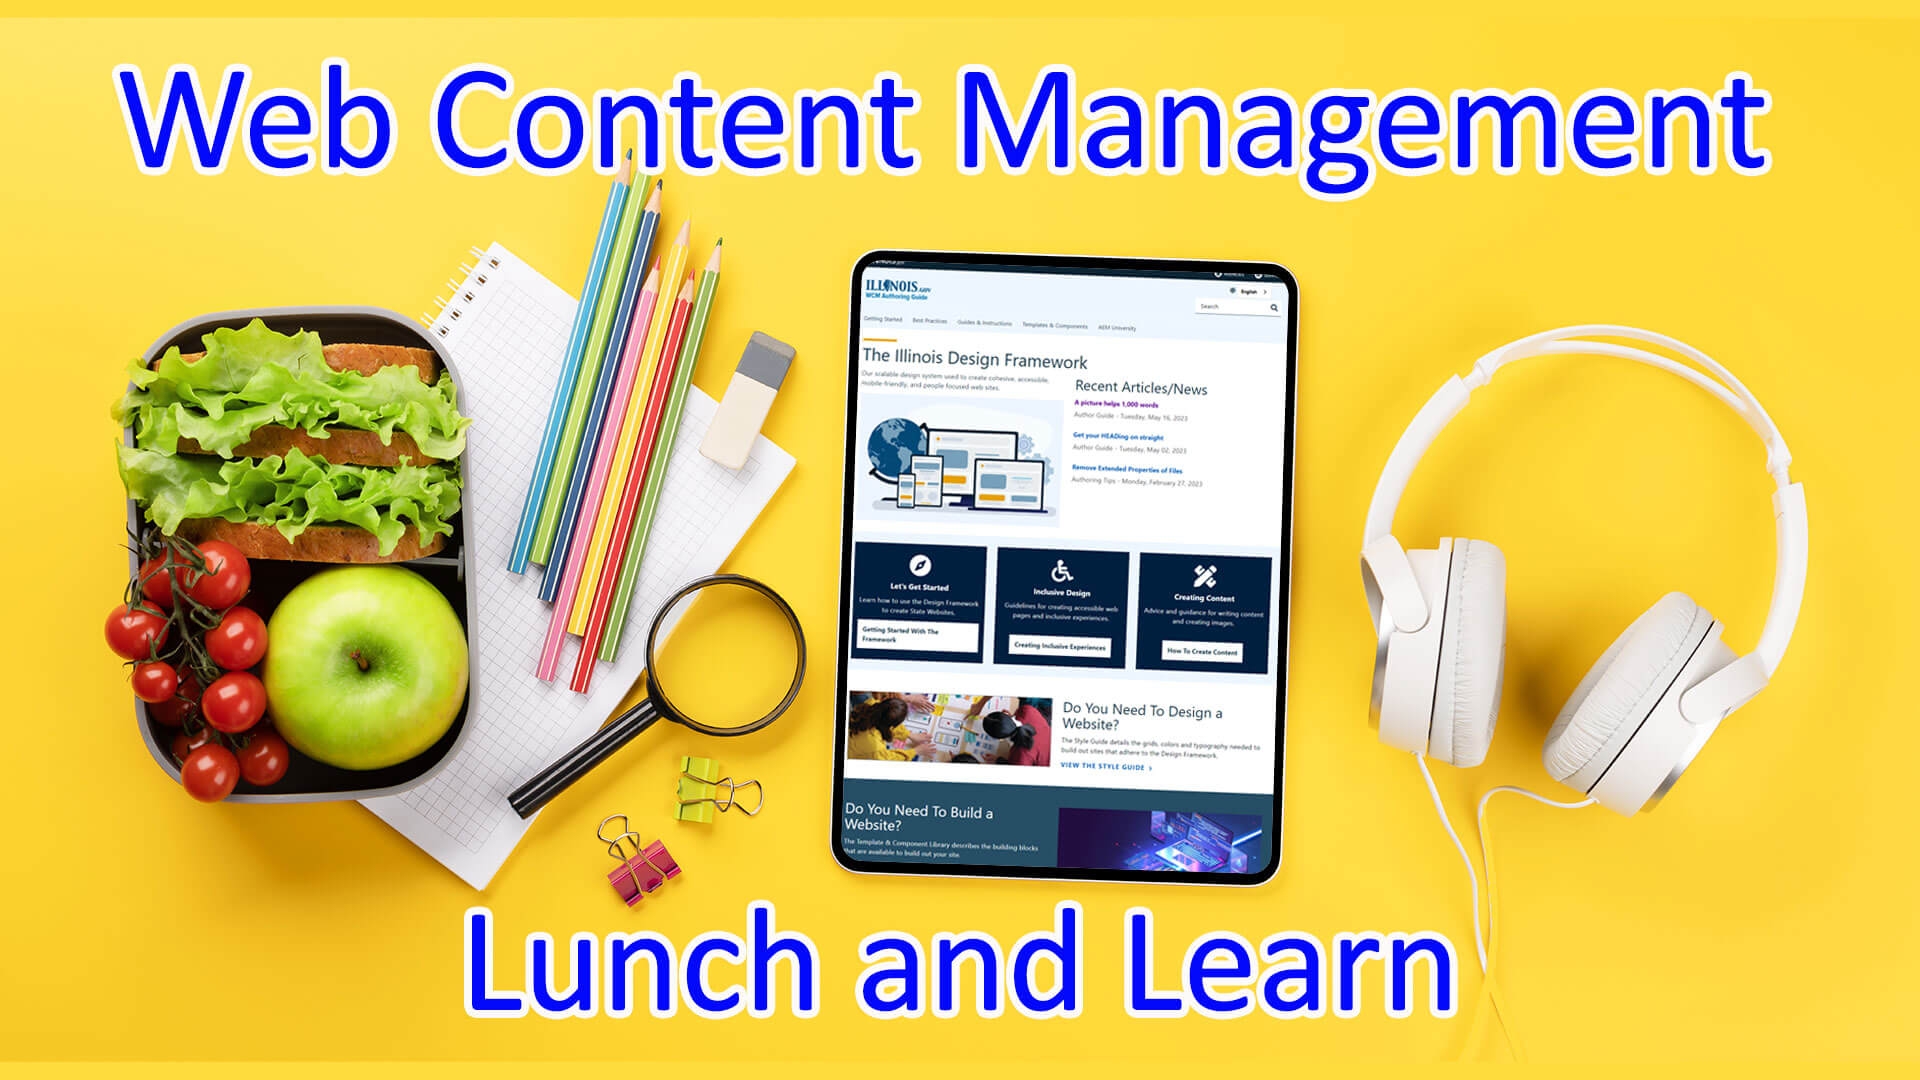 Web Content Management Lunch and Learn